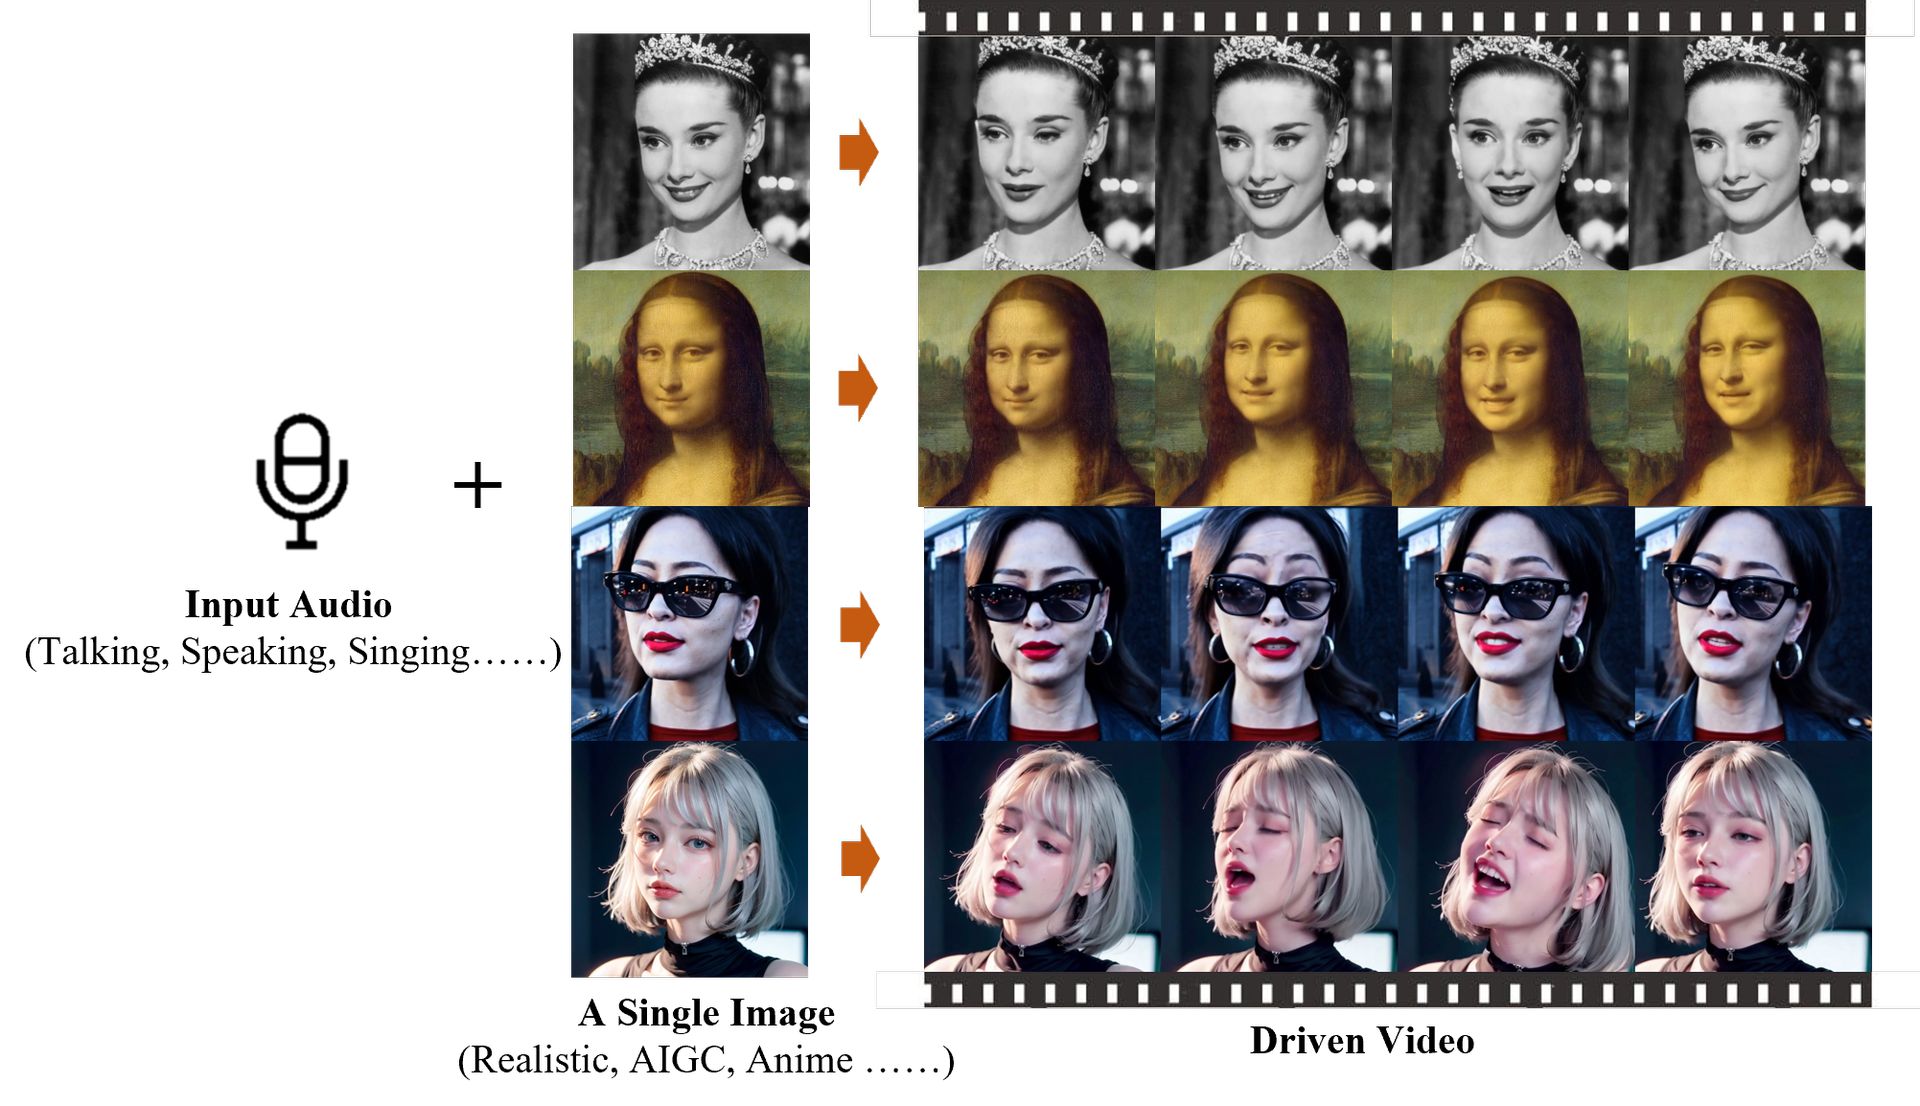 Meet EMO, the Alibaba AI research revolutionizing portrait animation! From still photos to speech or song, Emote Portrait Alive brings can handle all.